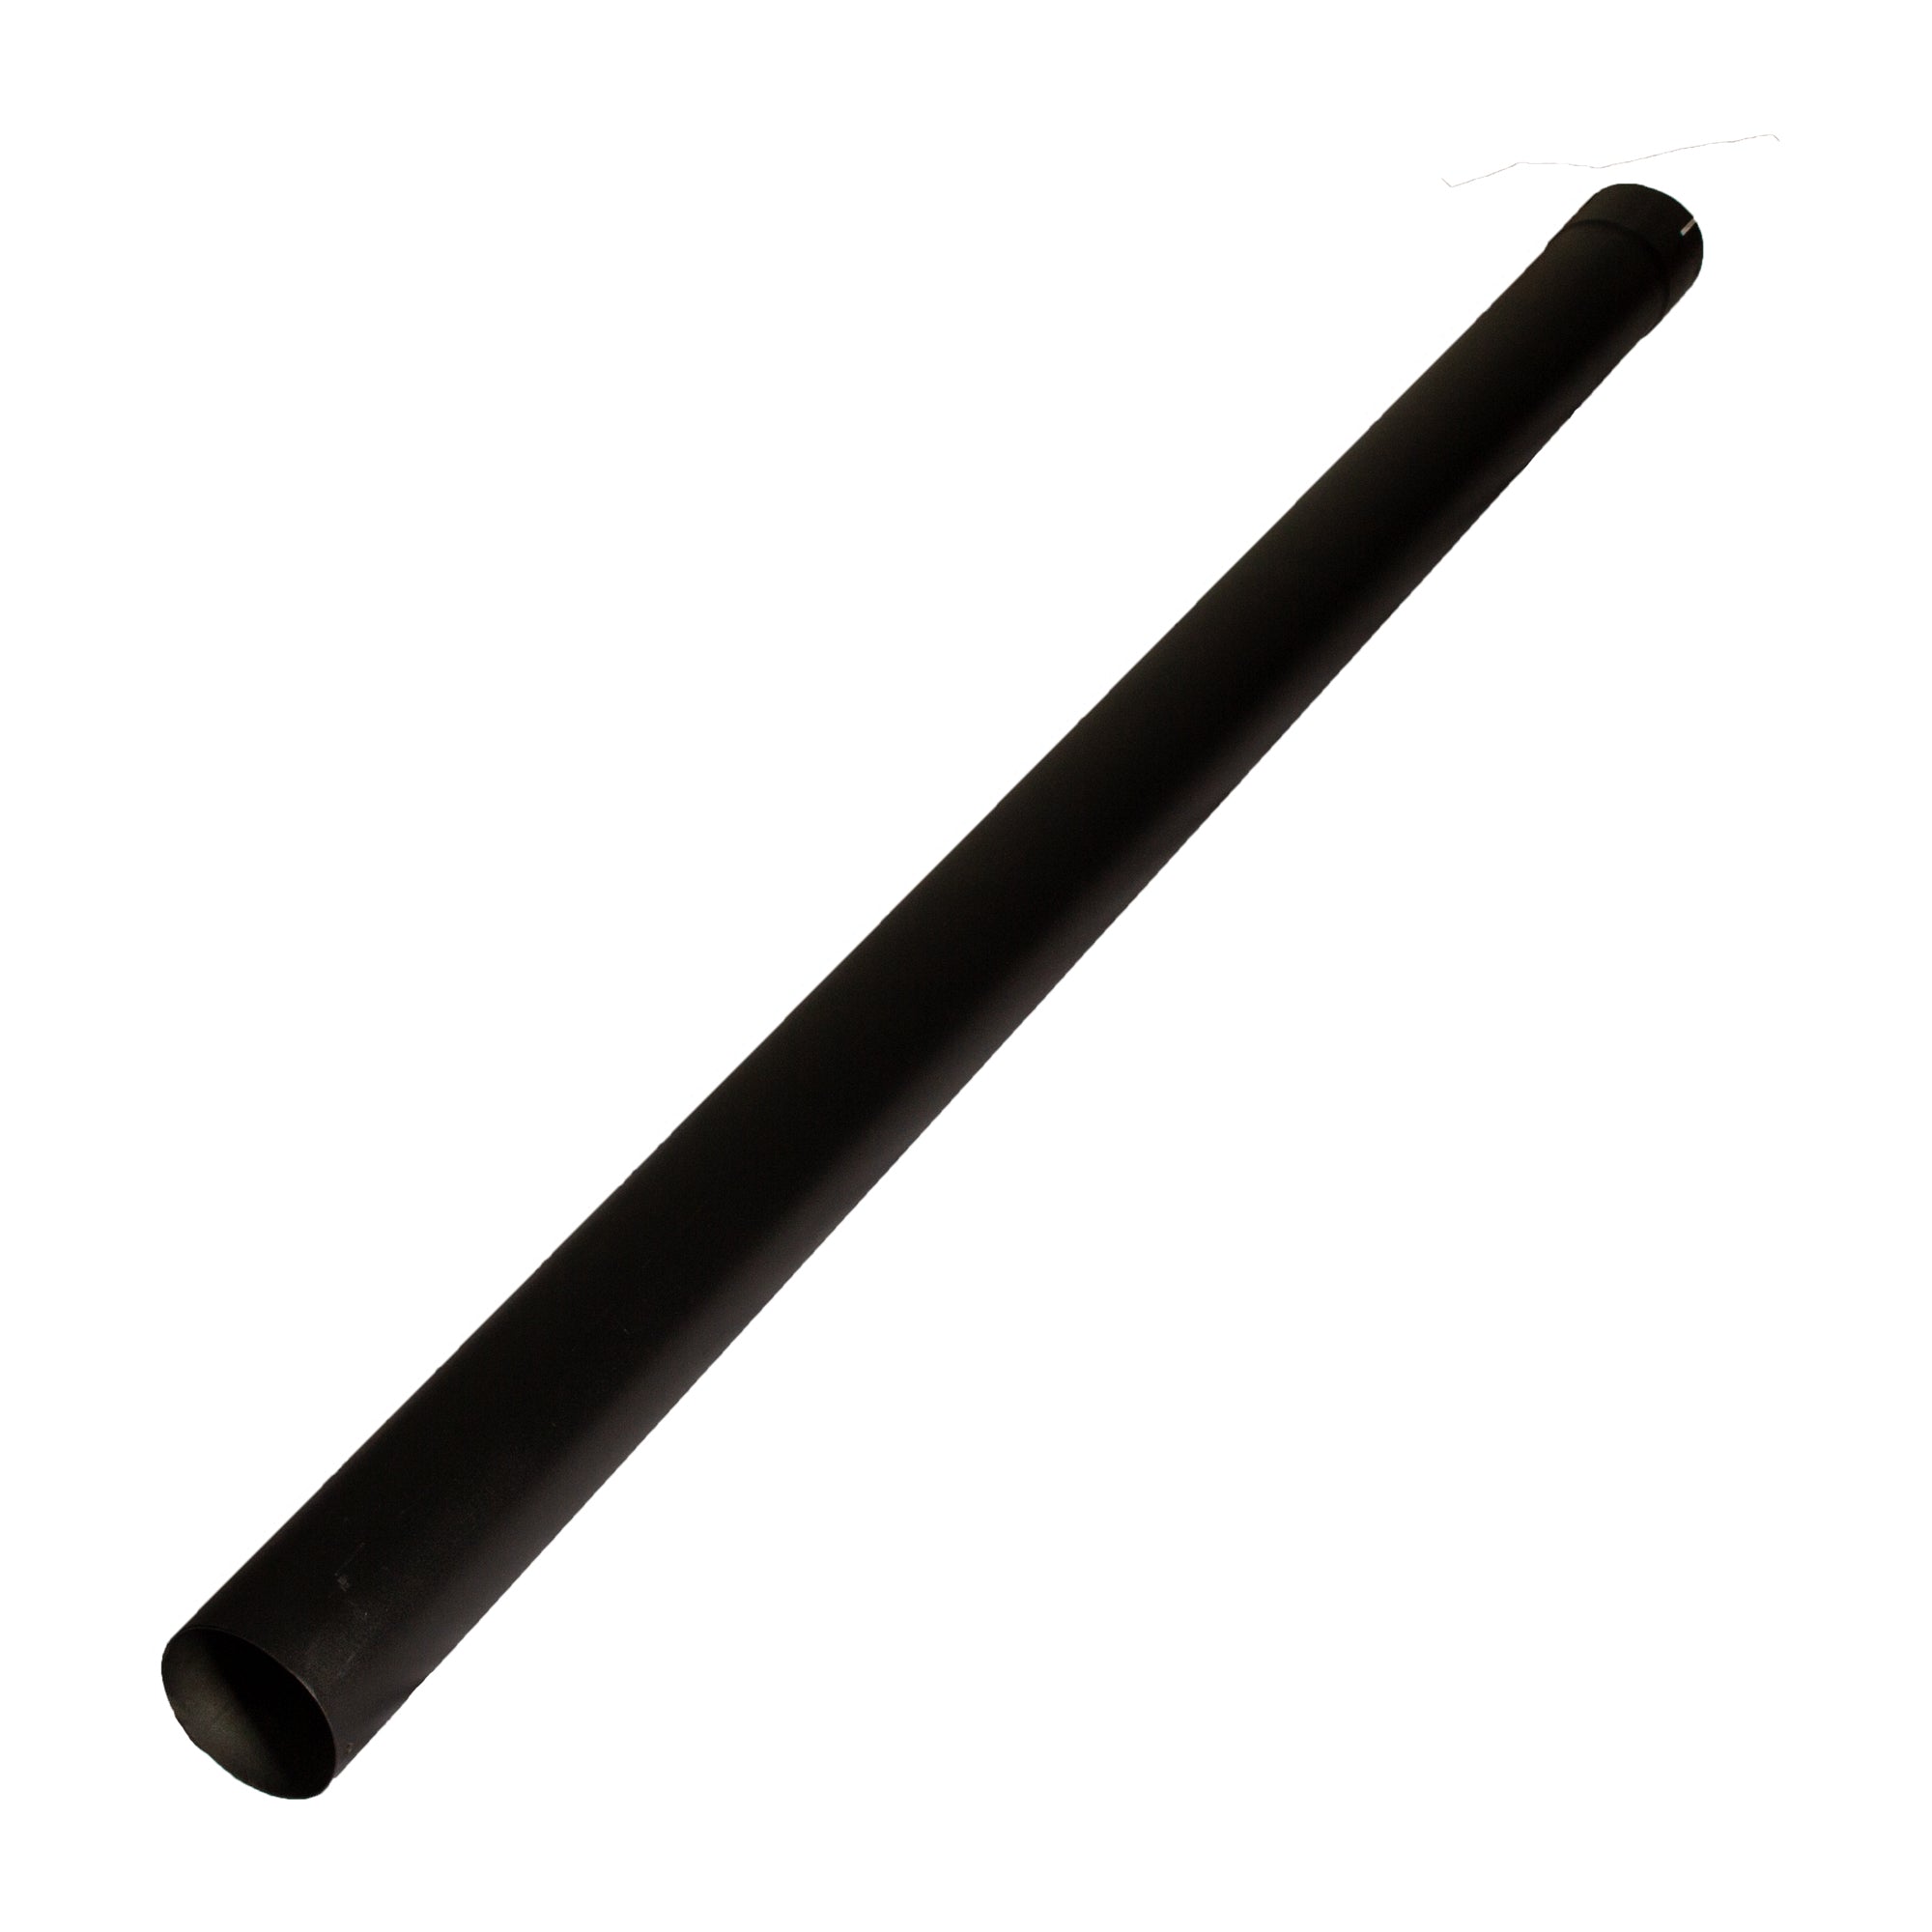 Exhaust Pipe Stack Replacement UNIVERSAL -4" x 72", Straight Black